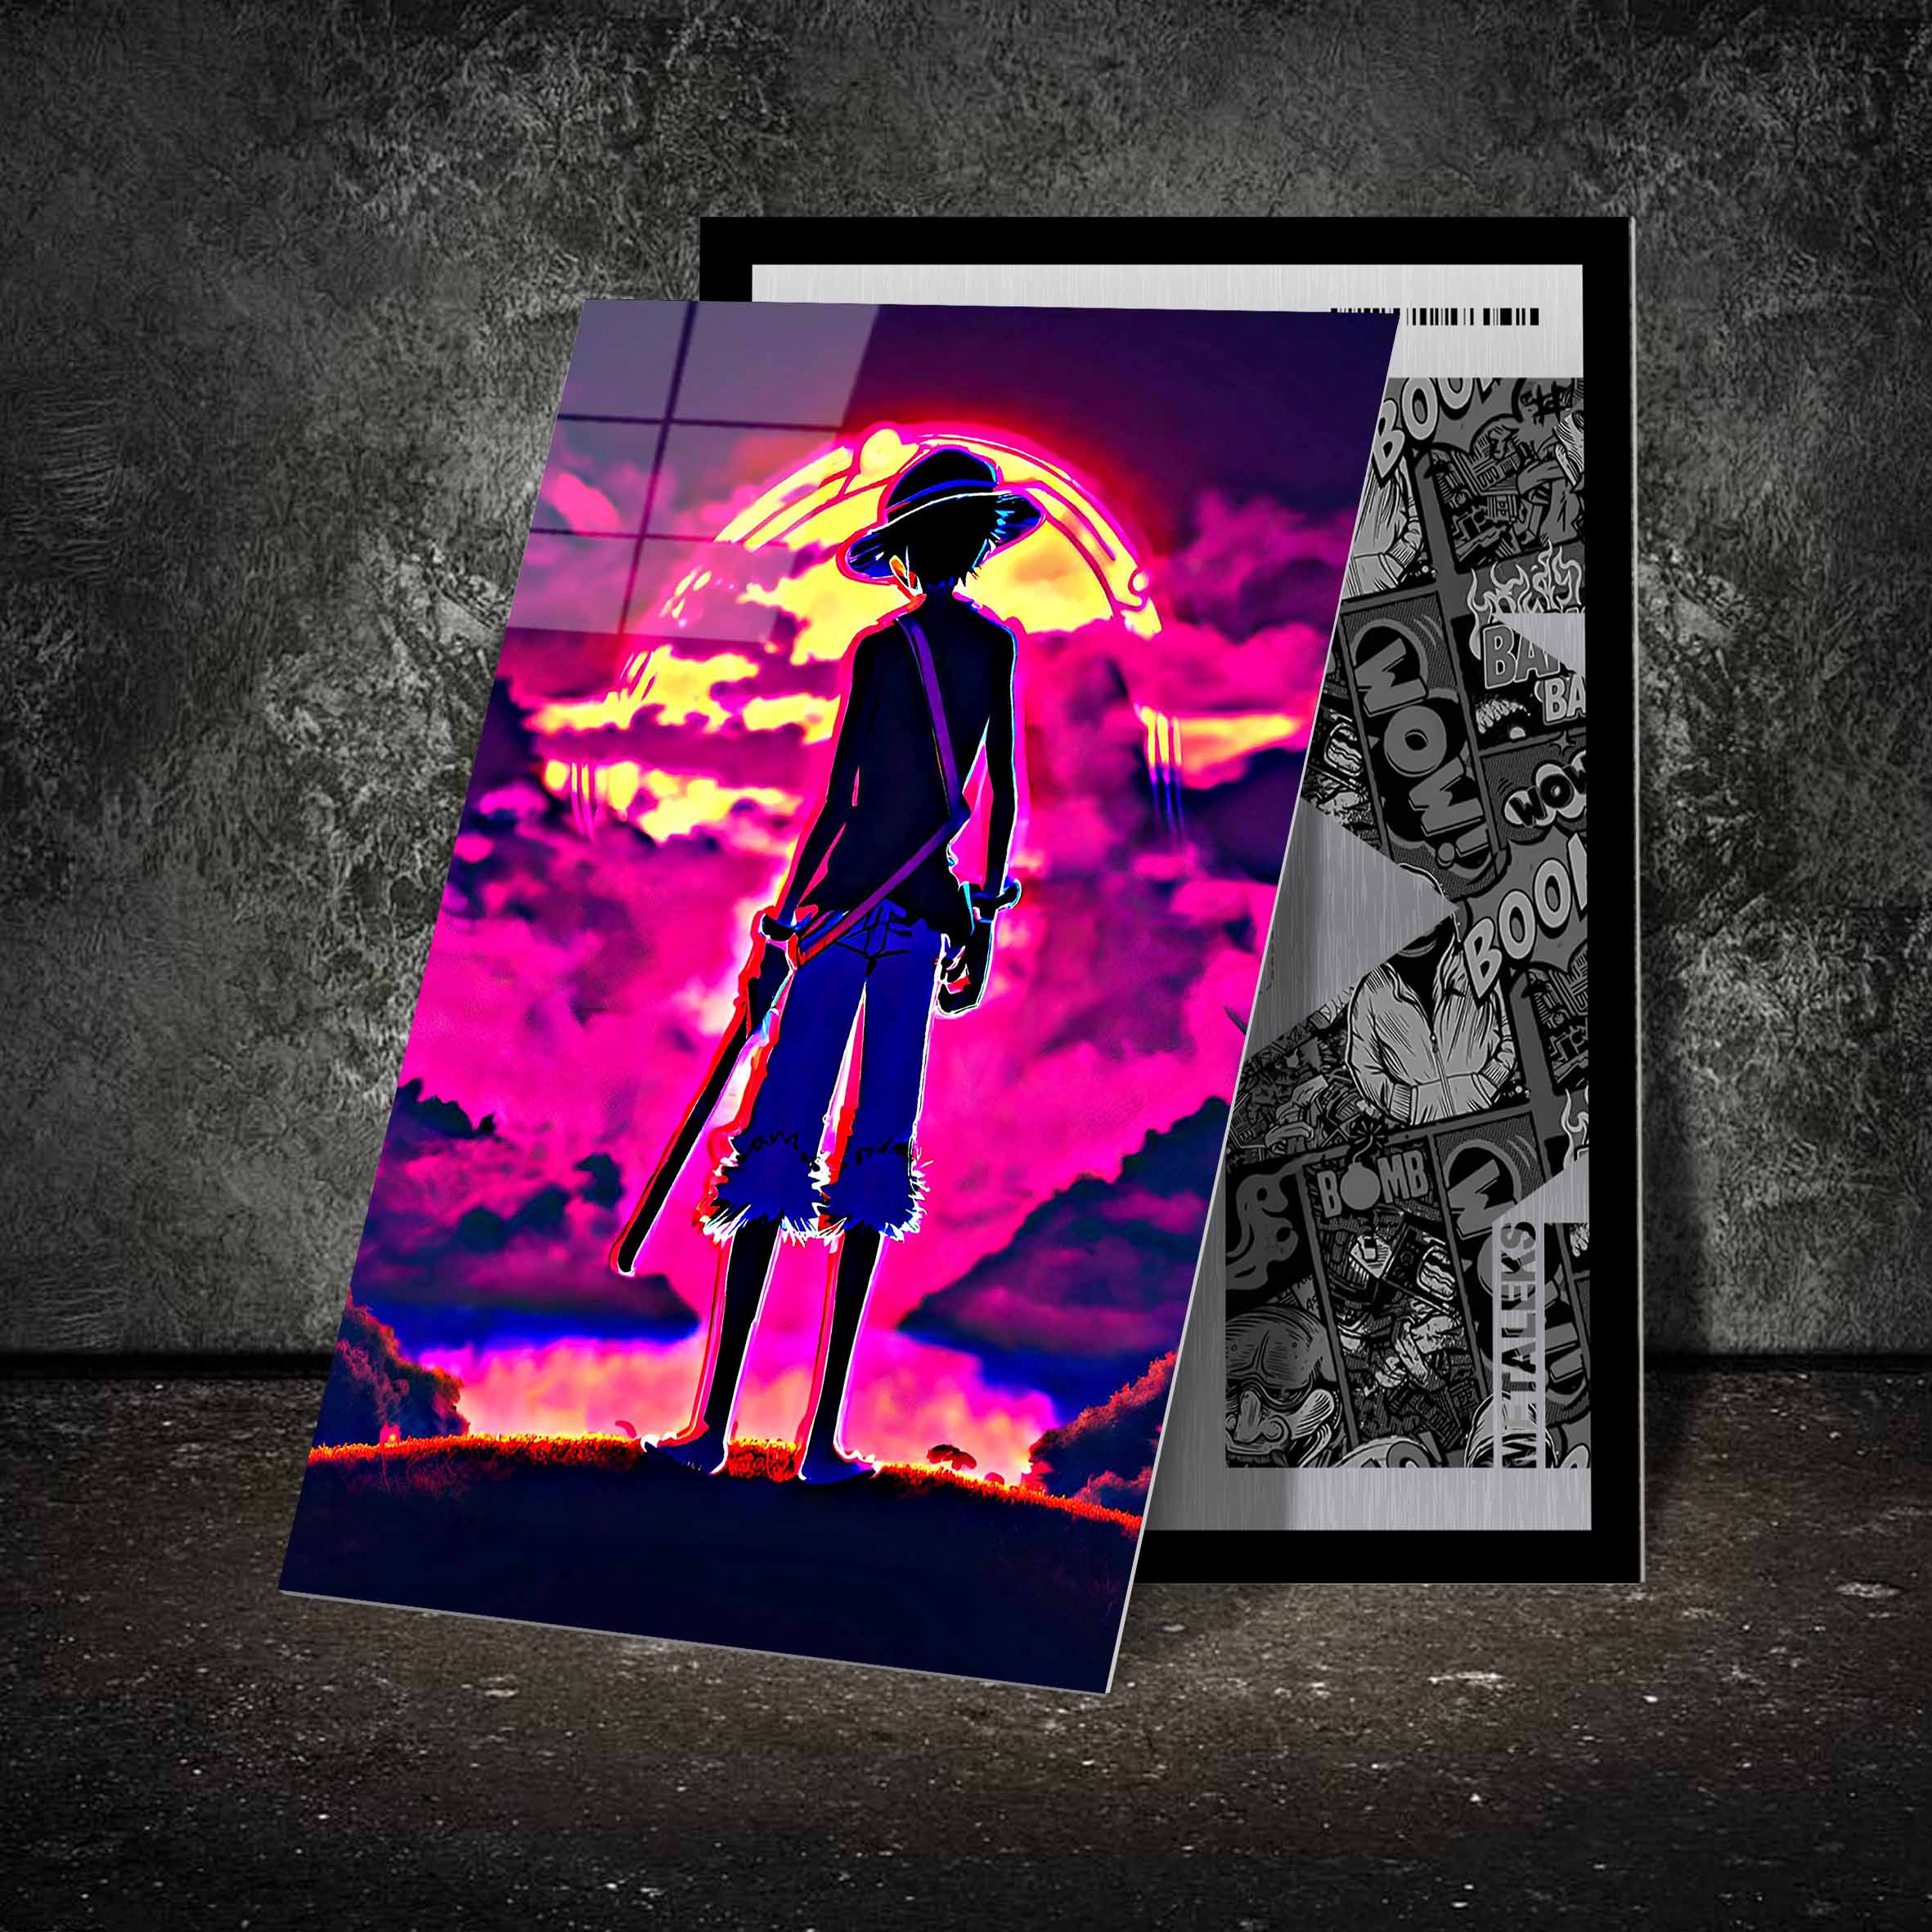 Sunset Monkey D Luffy-designed by @DynCreative